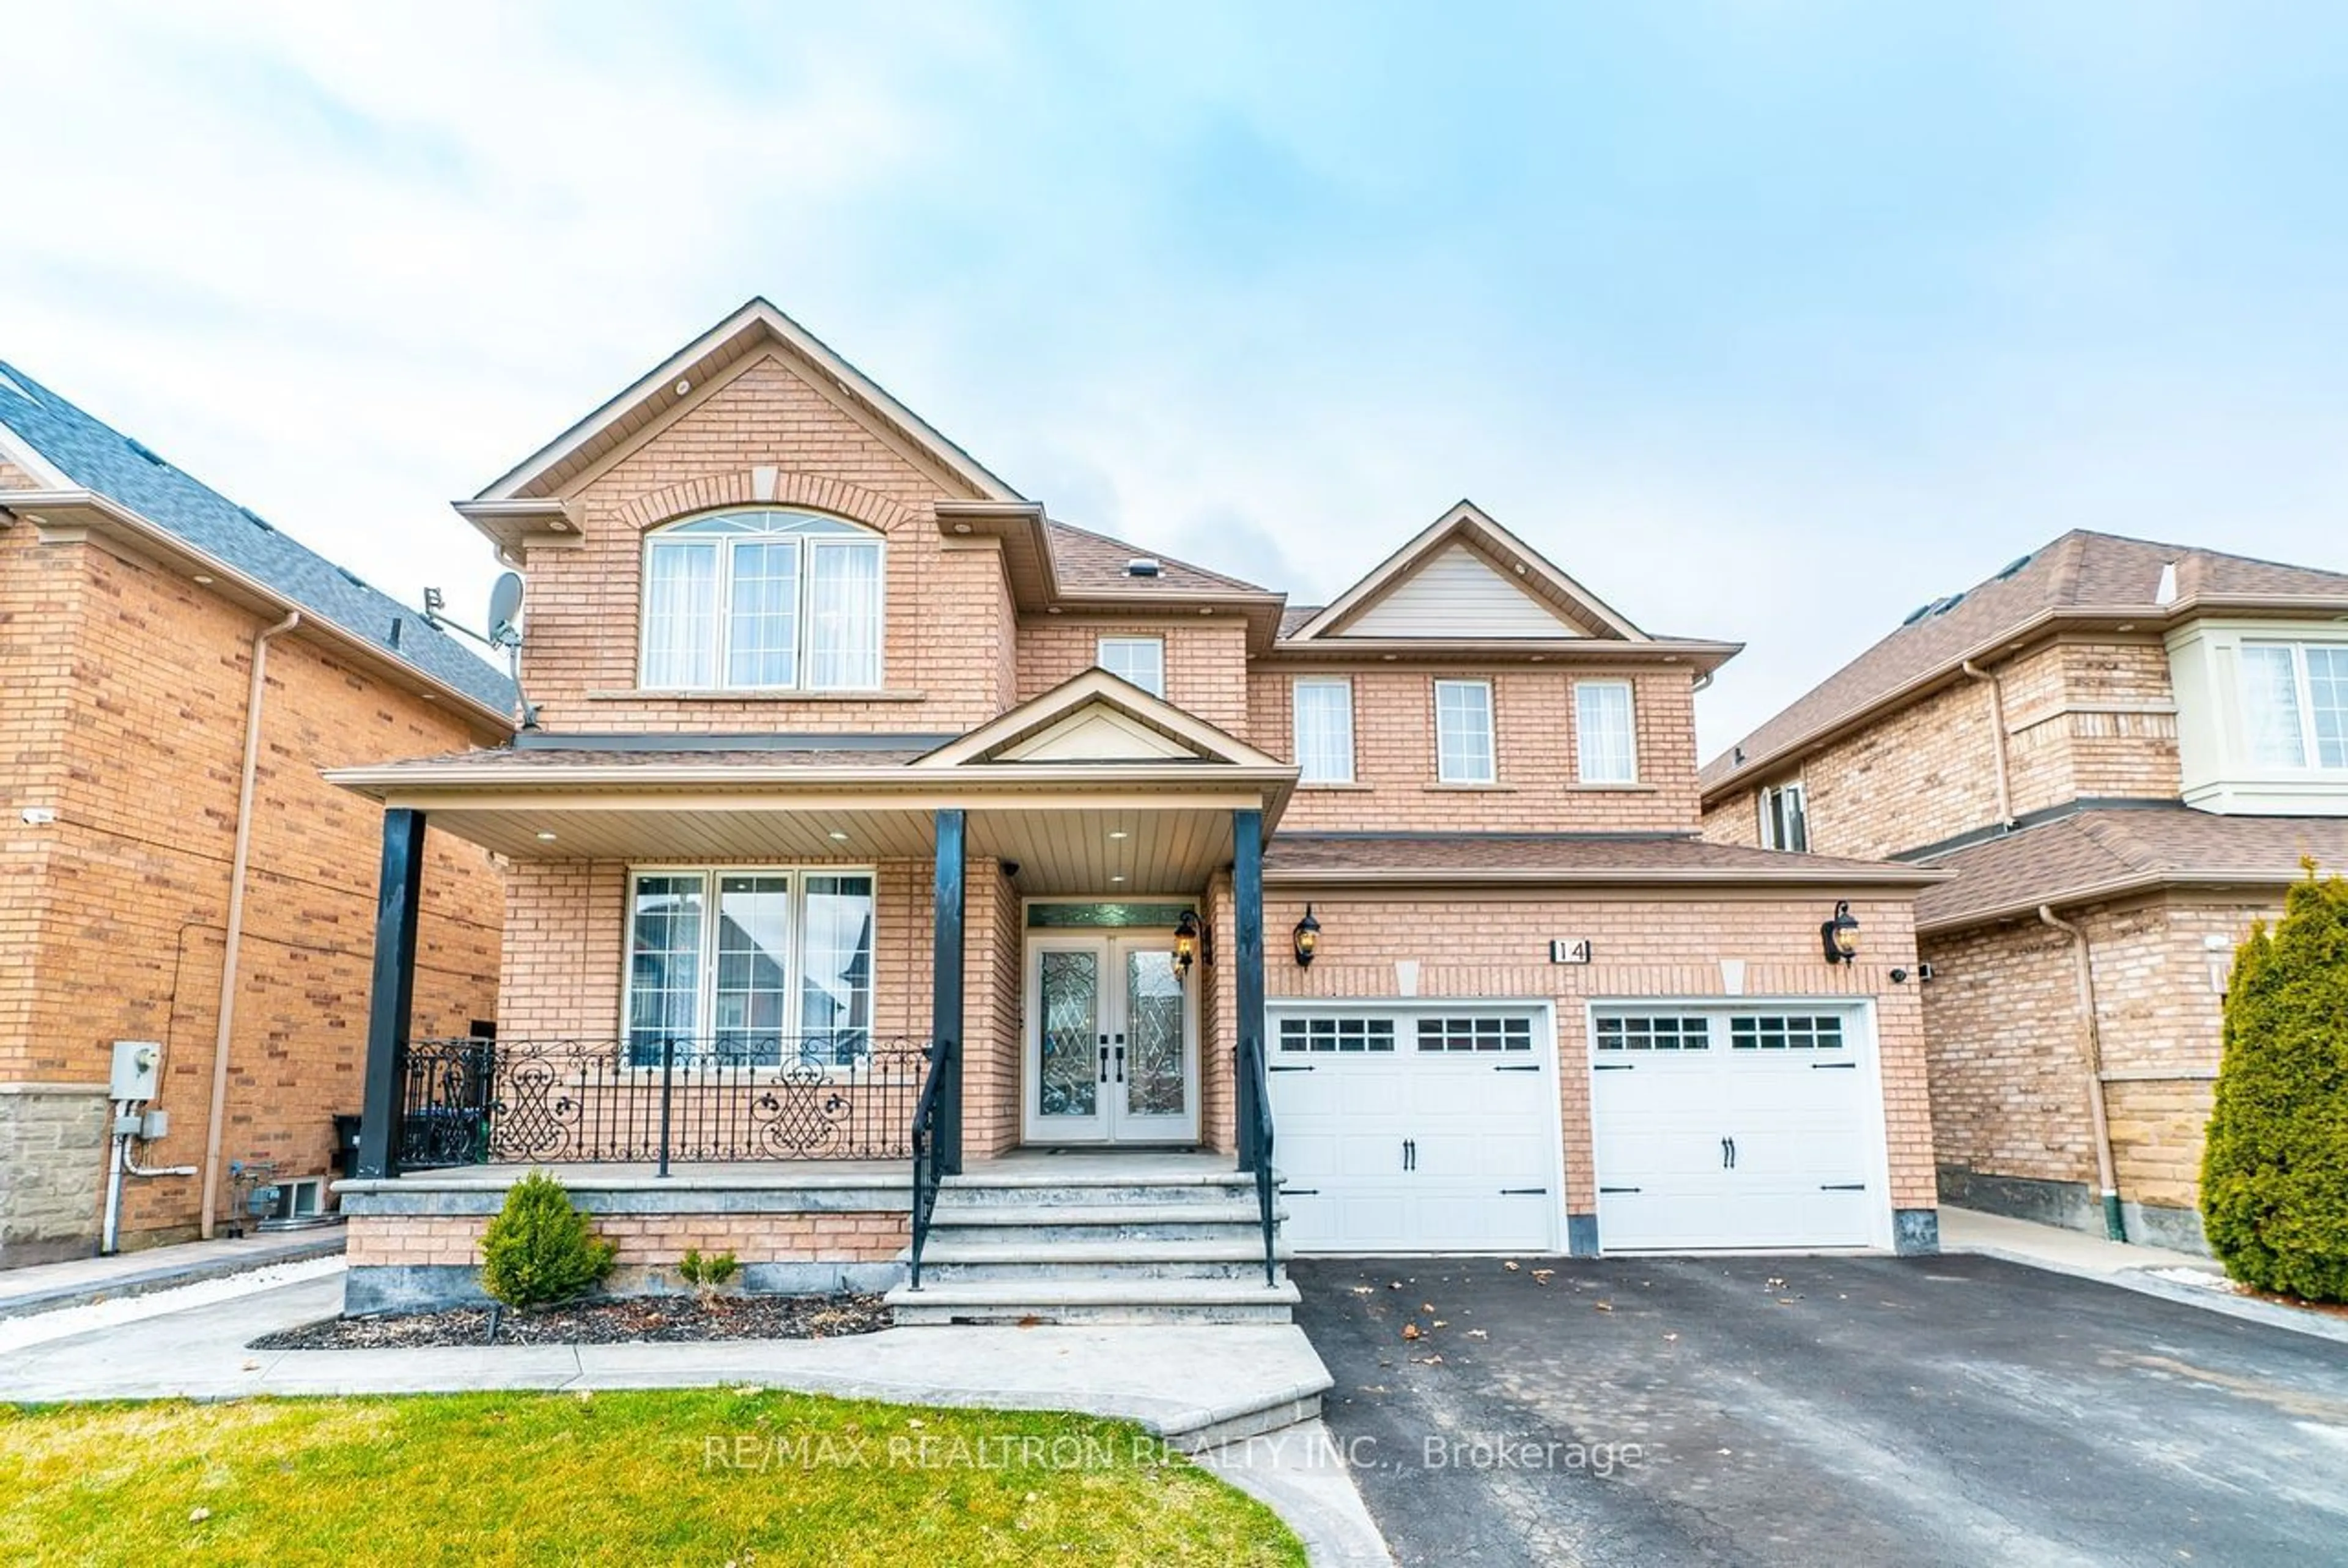 Home with brick exterior material for 14 Bramtrail Gate, Brampton Ontario L7A 3W3